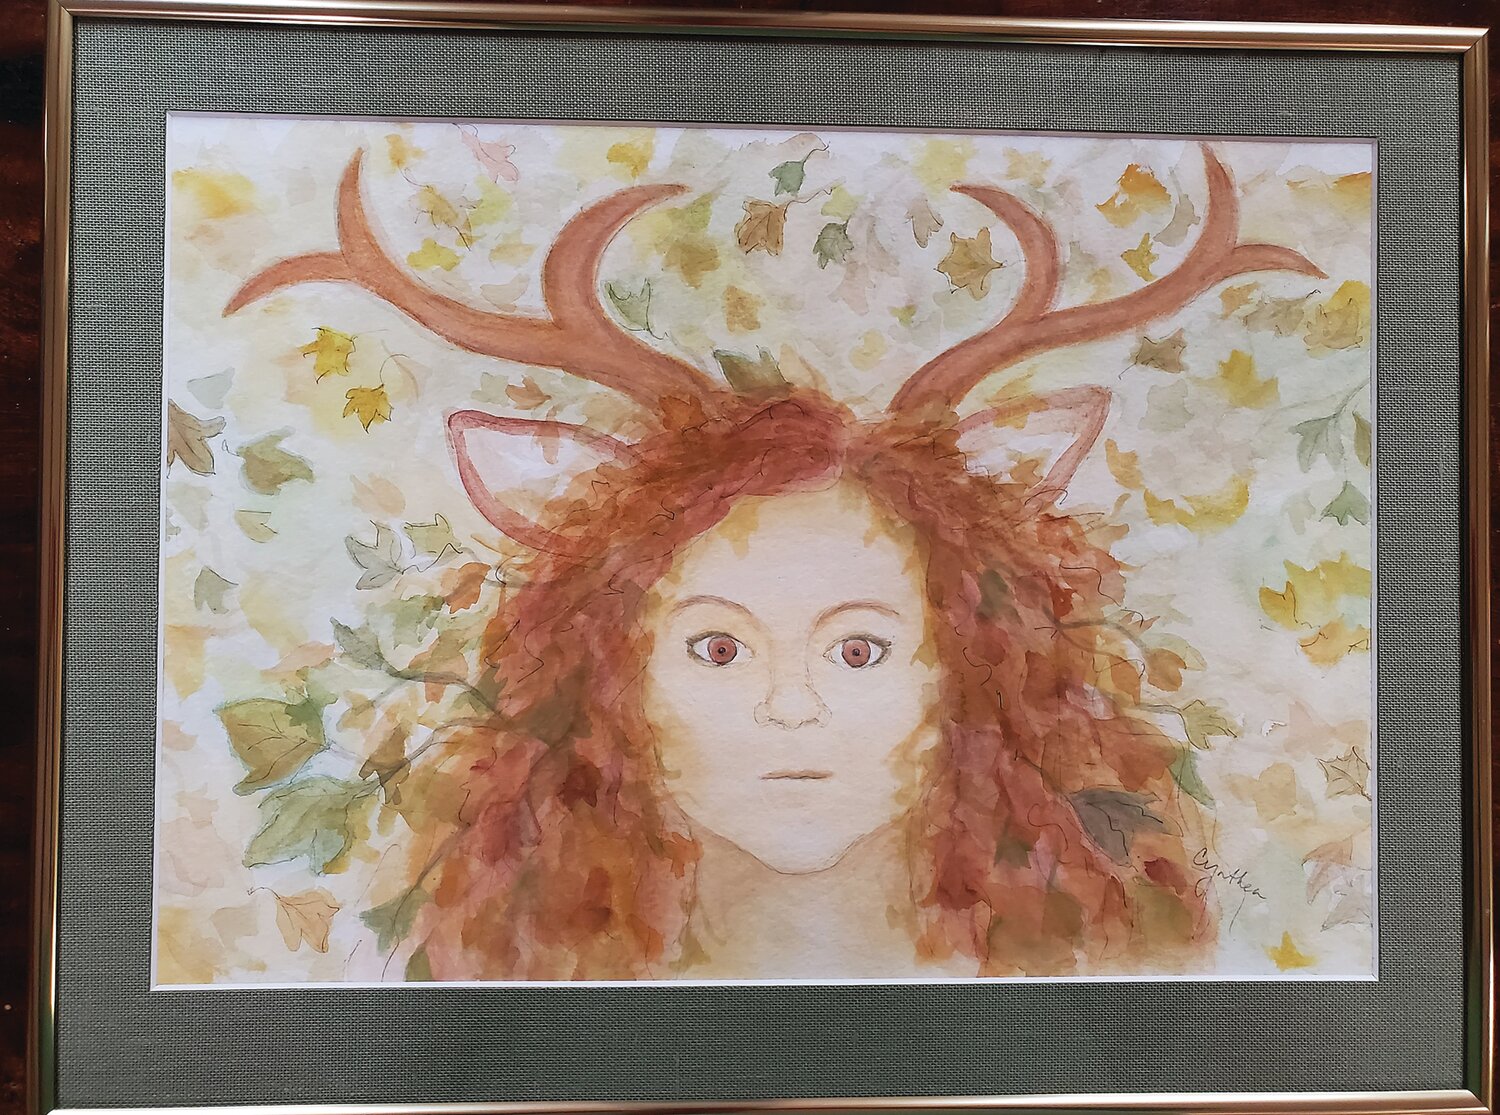 “Deer Girl/Spirit of Autumn” is a watercolor on paper by Cynthia Greb.